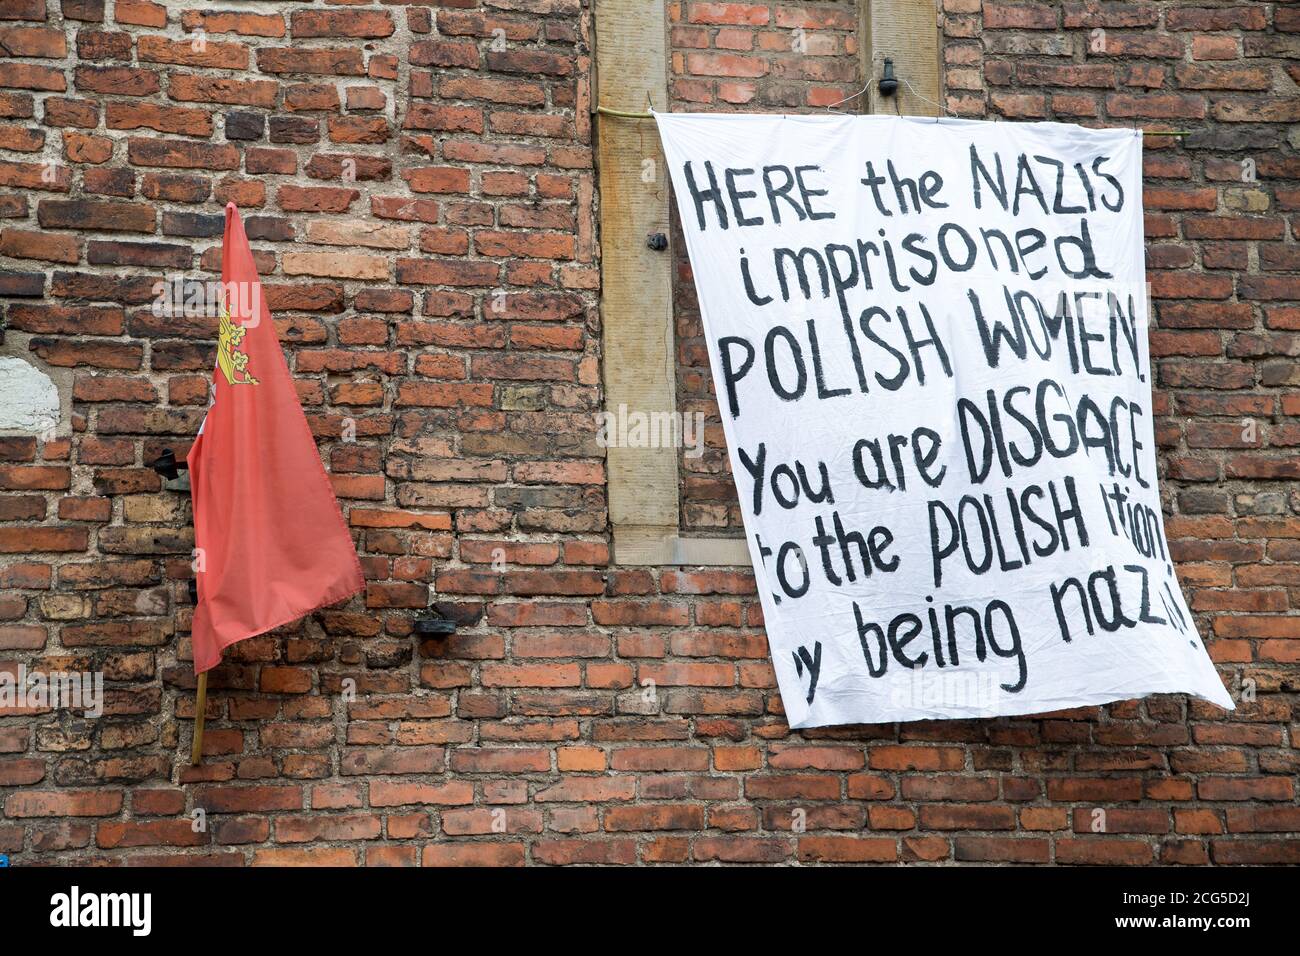 Counter-manifestation to The No more brother wars march in Gdansk, Poland. September 5th 2020 © Wojciech Strozyk / Alamy Stock Photo *** Local Caption Stock Photo